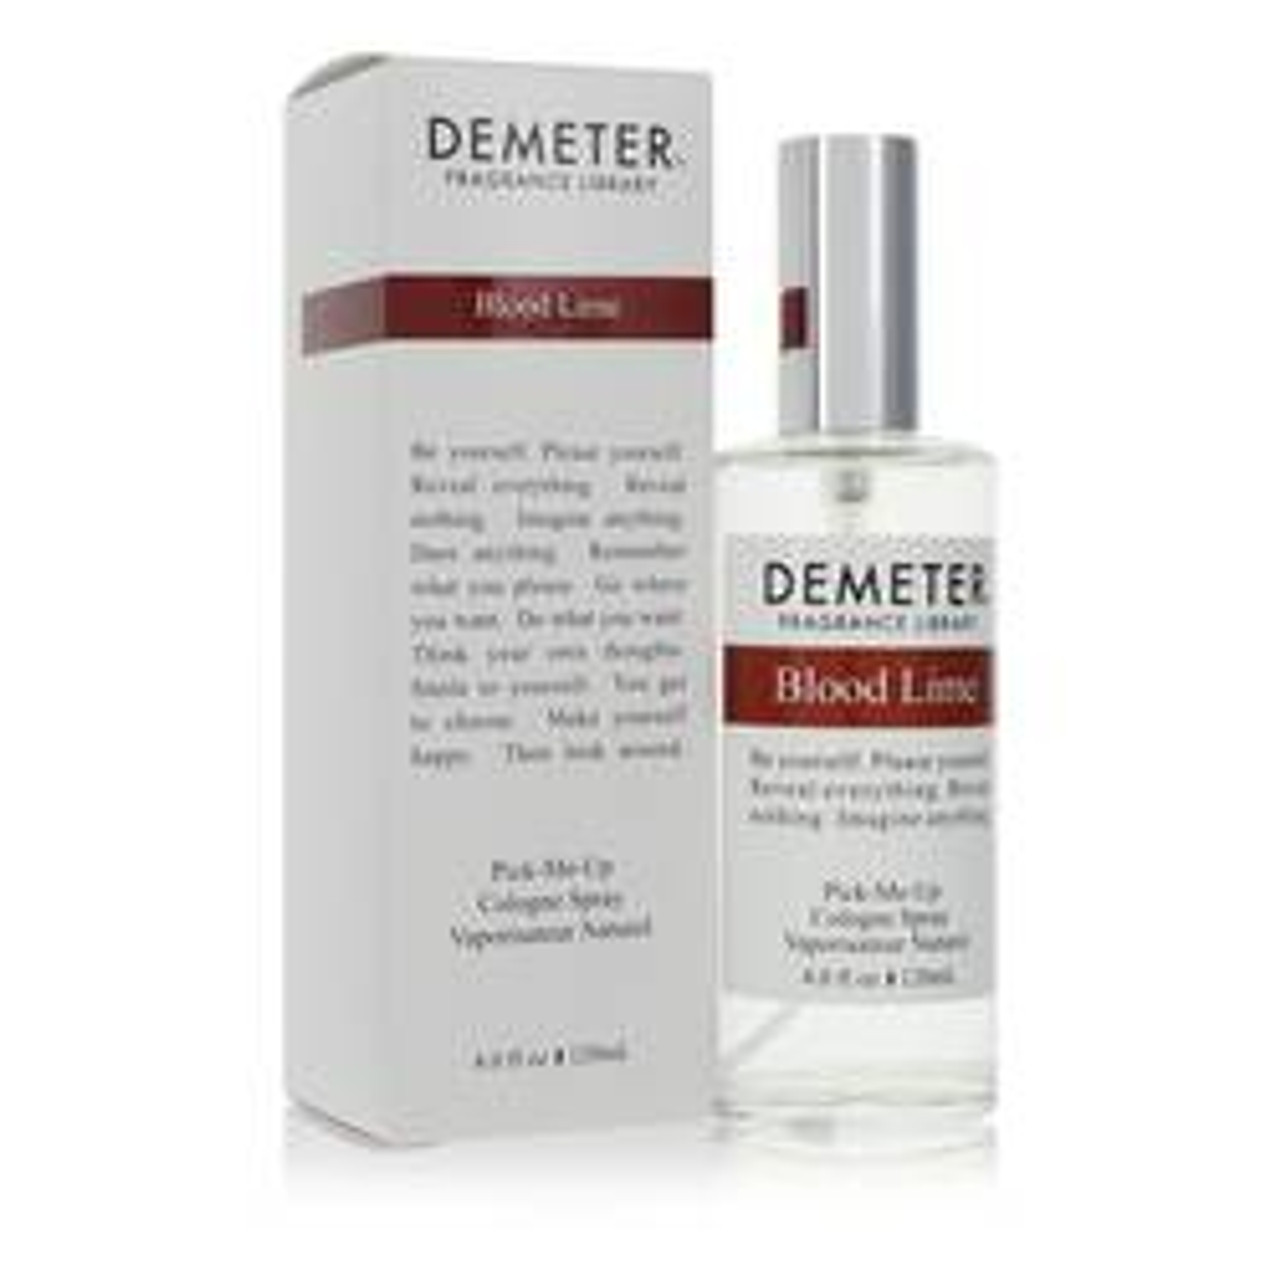 Demeter Blood Lime Cologne By Demeter Pick Me Up Cologne Spray (Unisex) 4 oz for Men - [From 79.50 - Choose pk Qty ] - *Ships from Miami